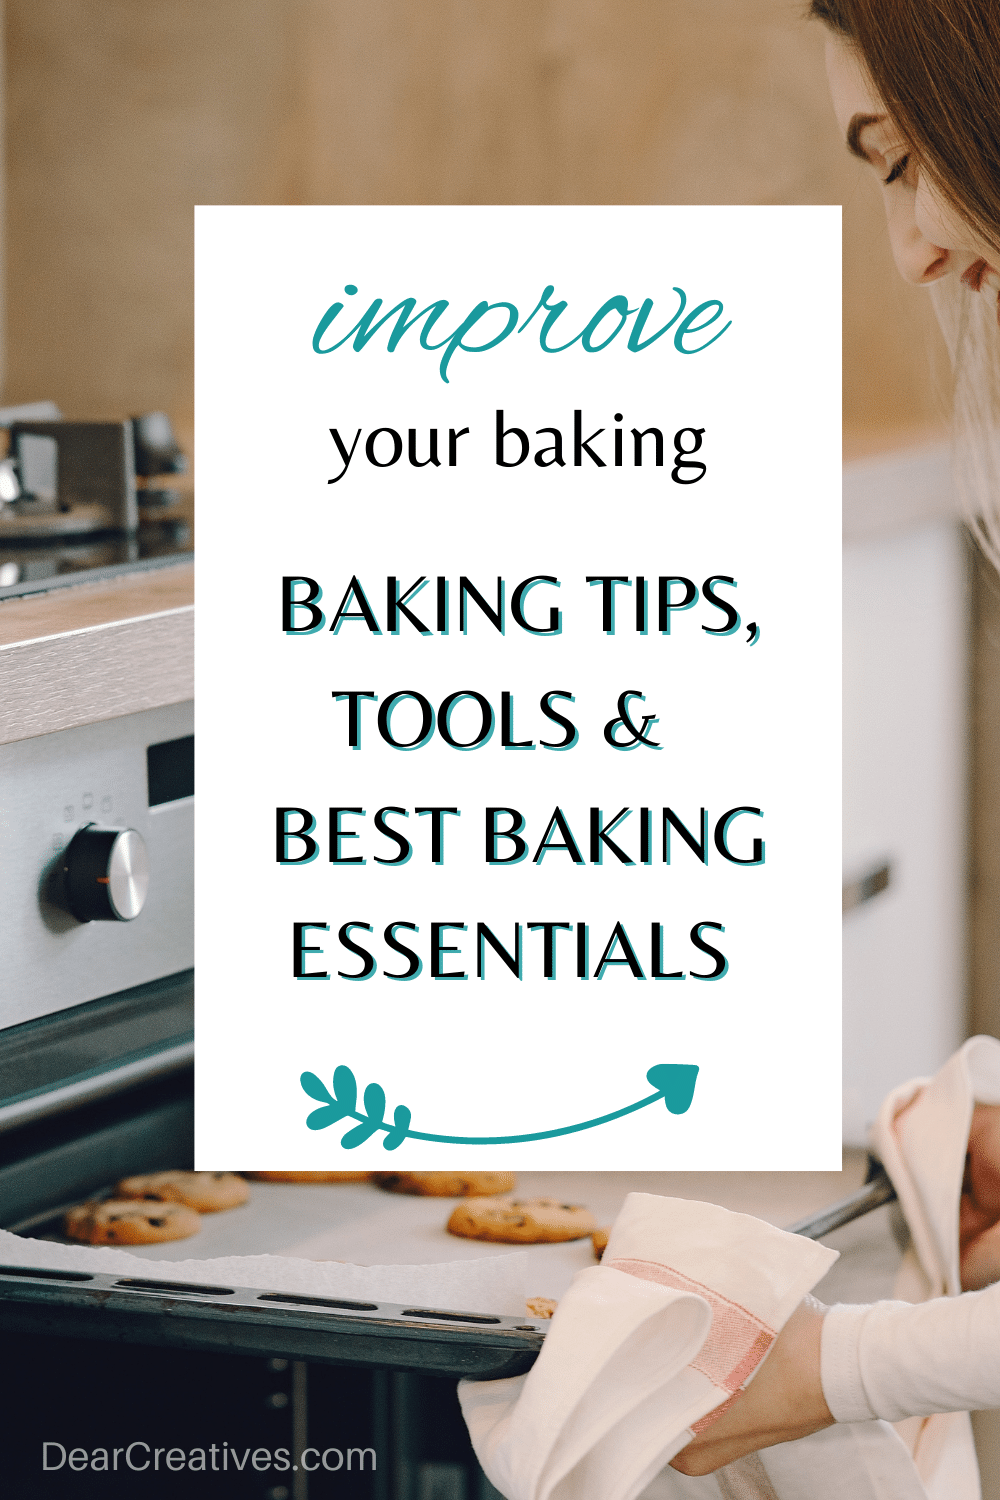 Tips For Baking – Do This Before Baking!